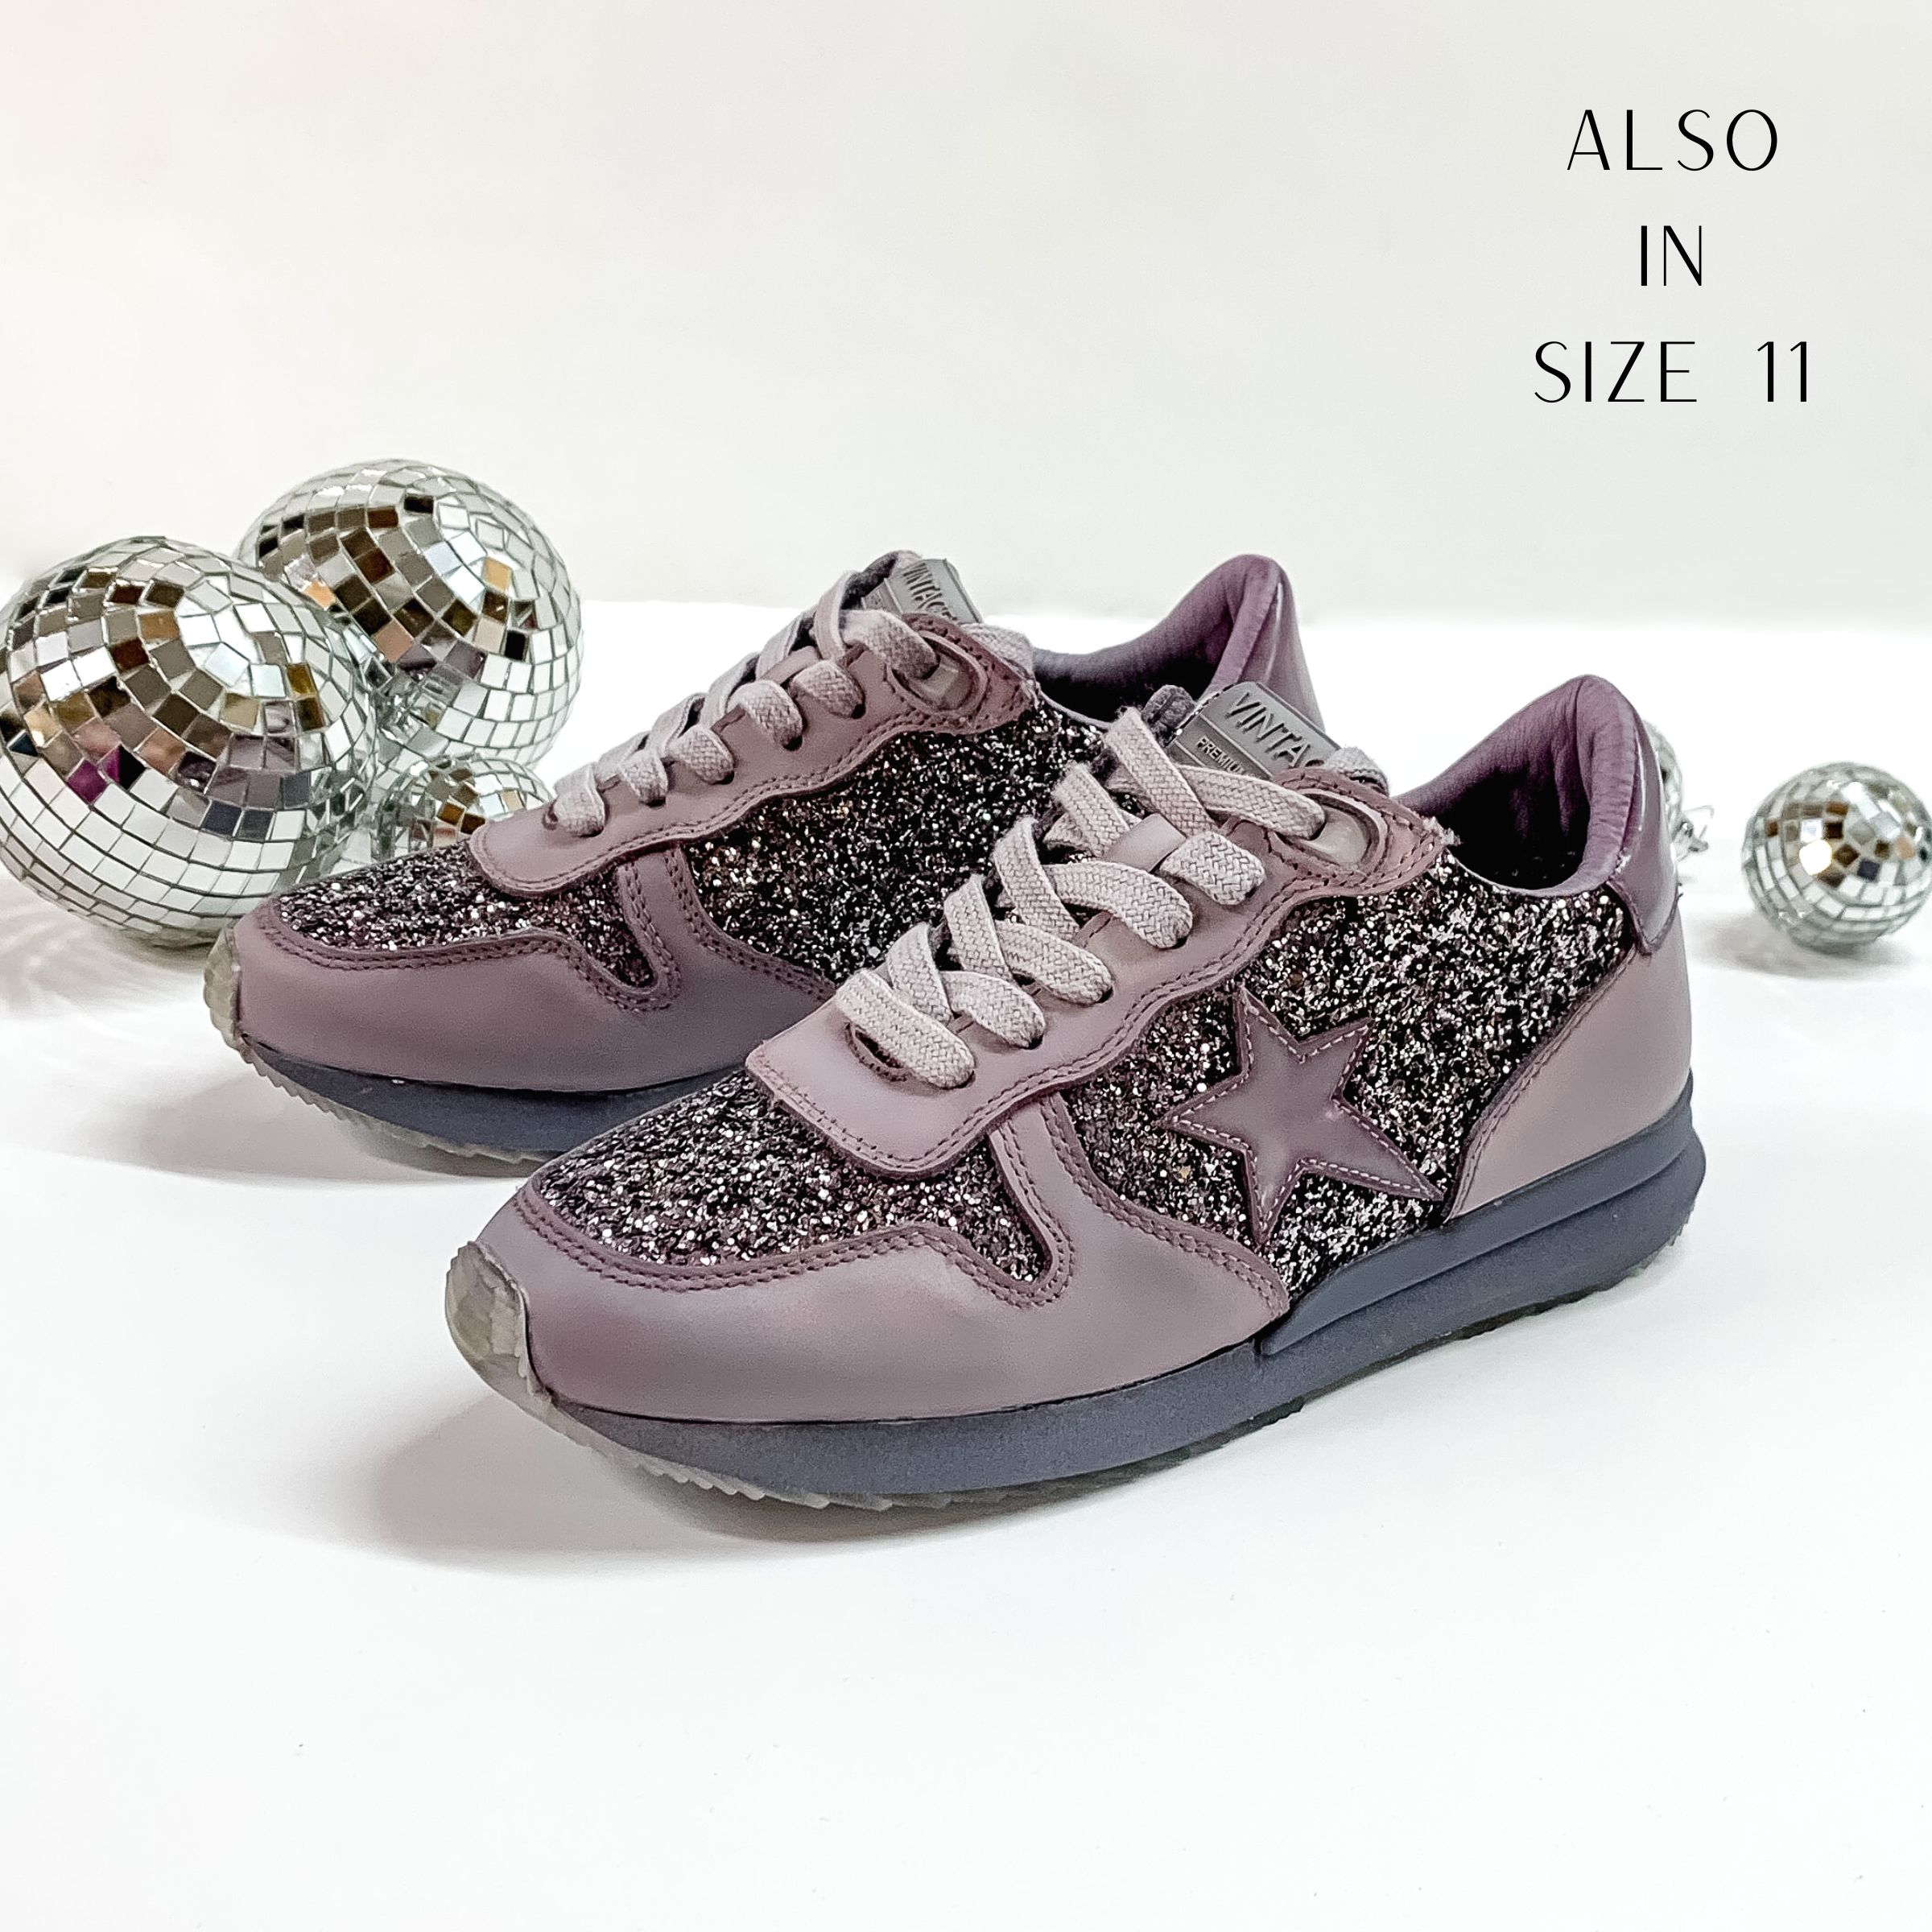 Grey purple colored tennis shoes and shoelaces. The tennis shoes also have a grey purple star patch on the side of the shoe and grey purple glitter throughout. These shoes are pictured on a white background with disco balls behind them. 